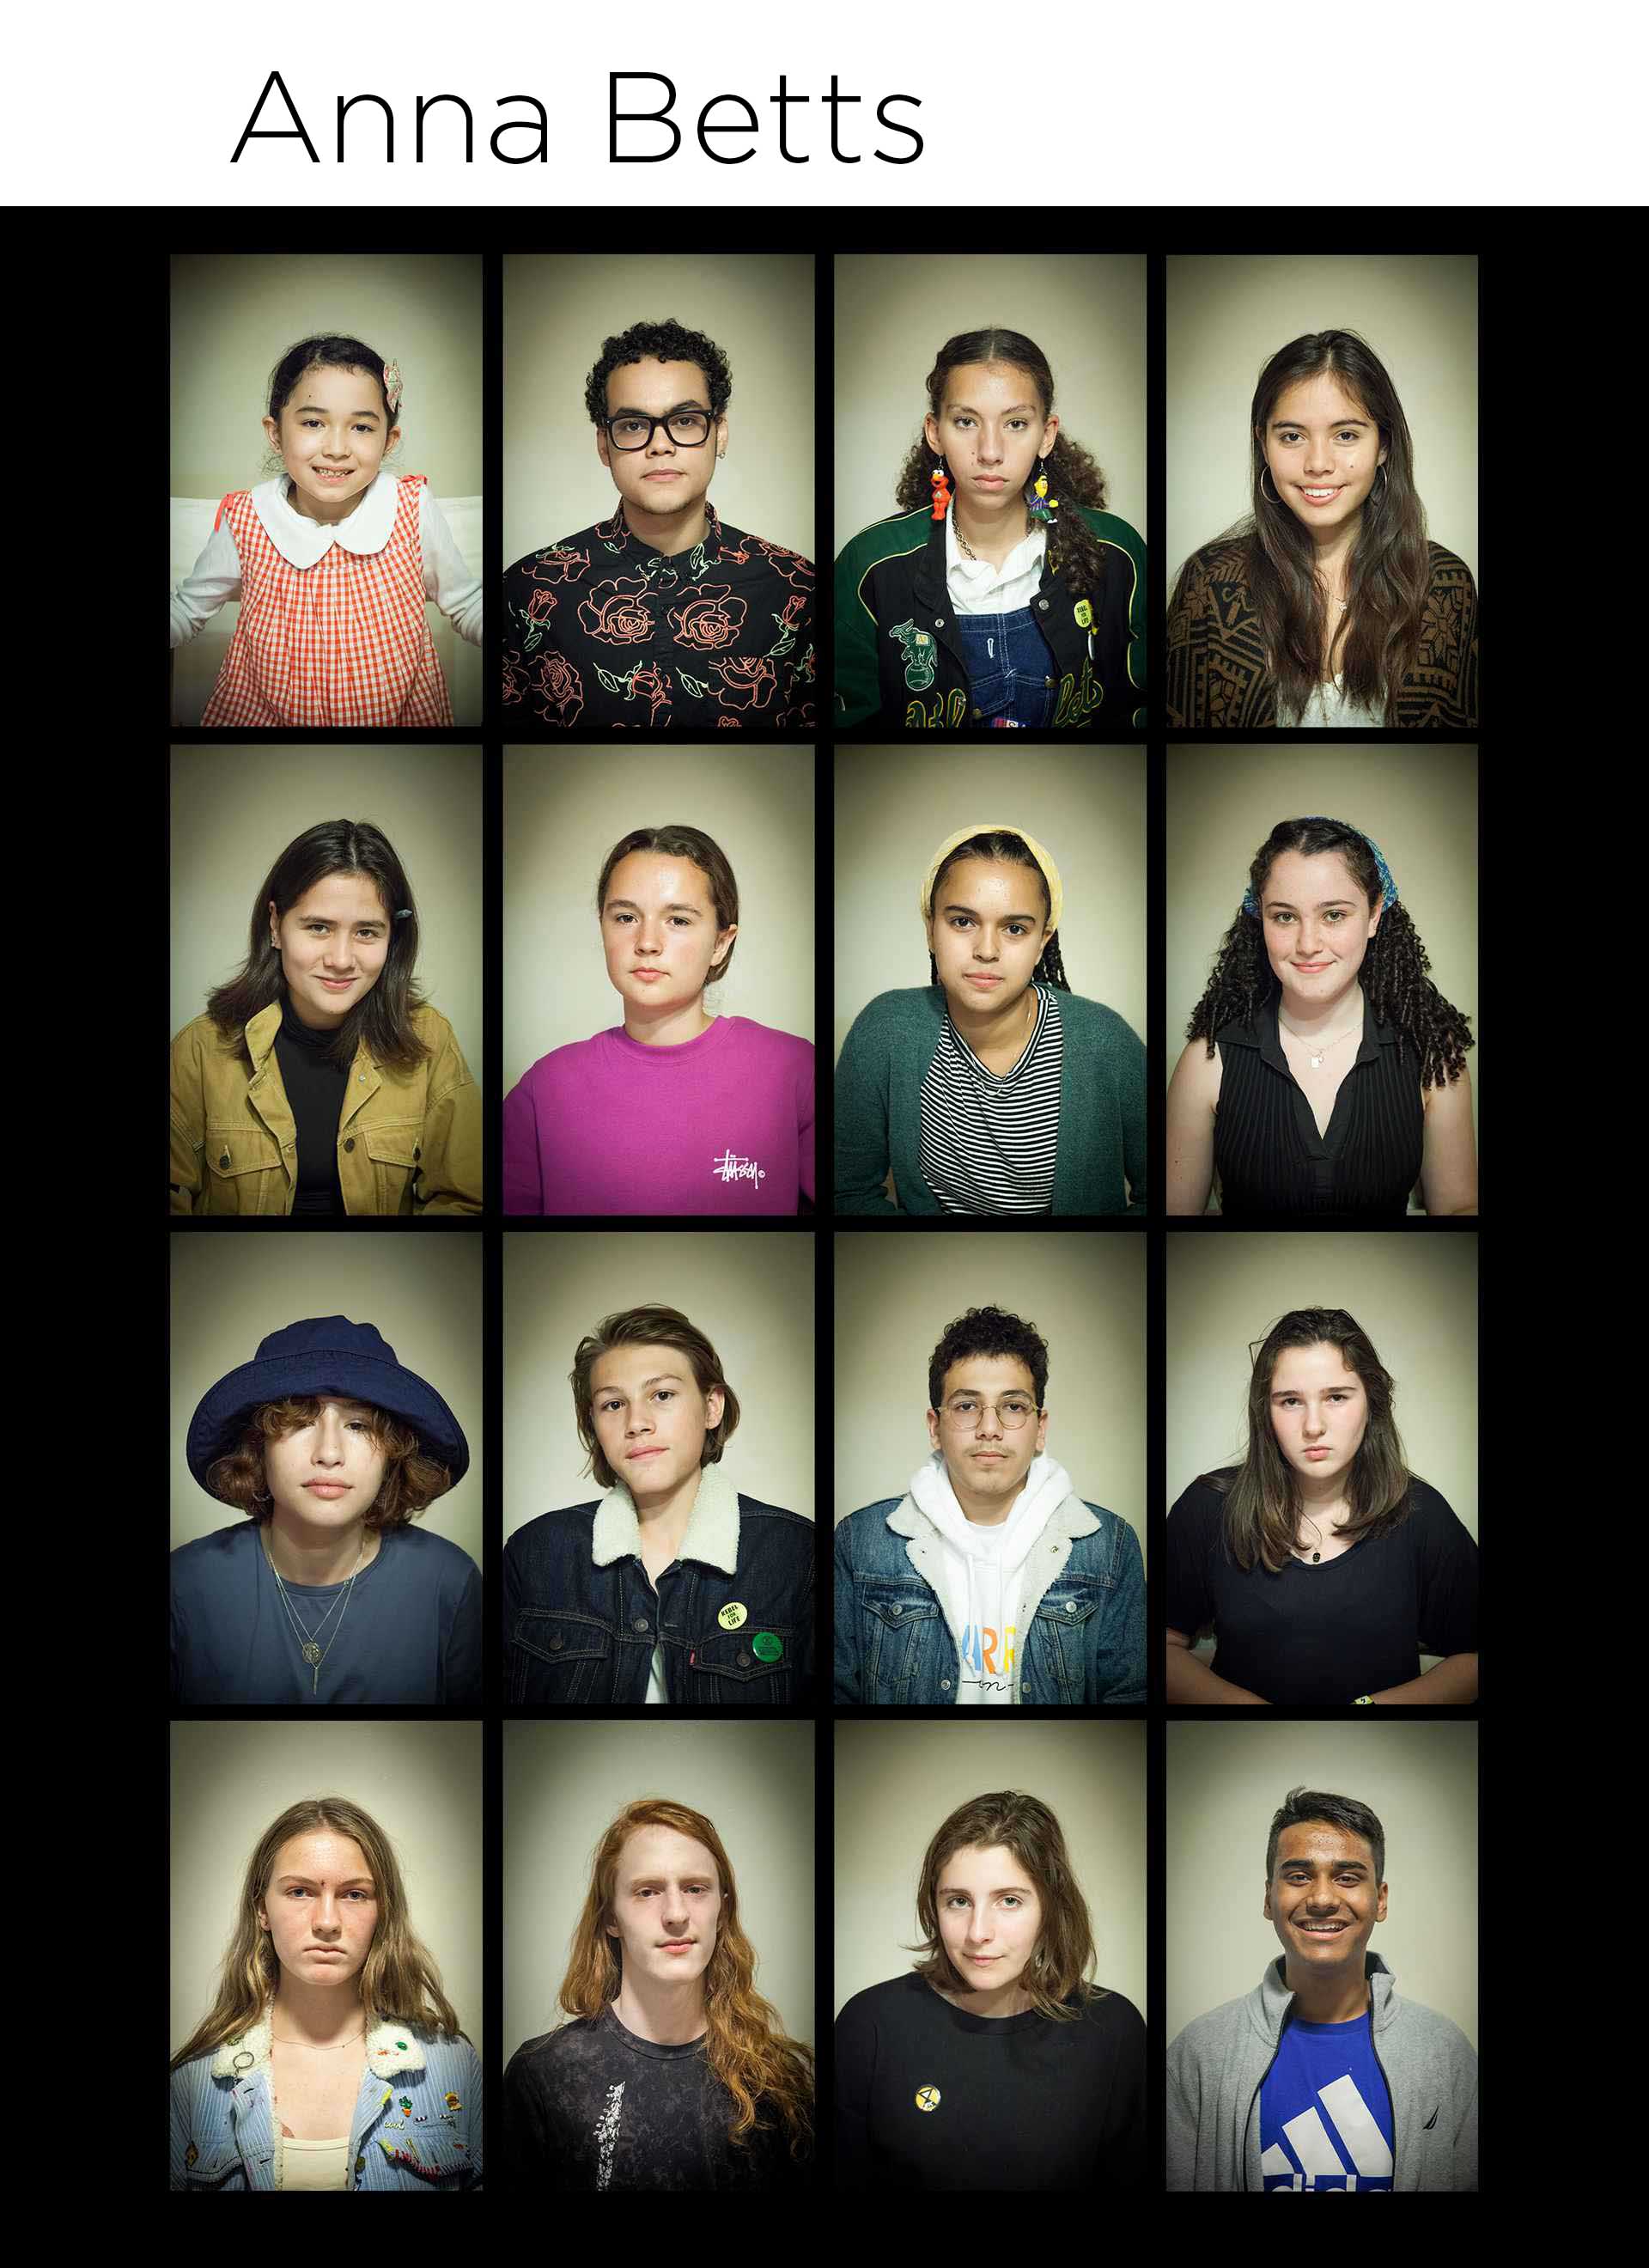 grid of portraits of young climate activists